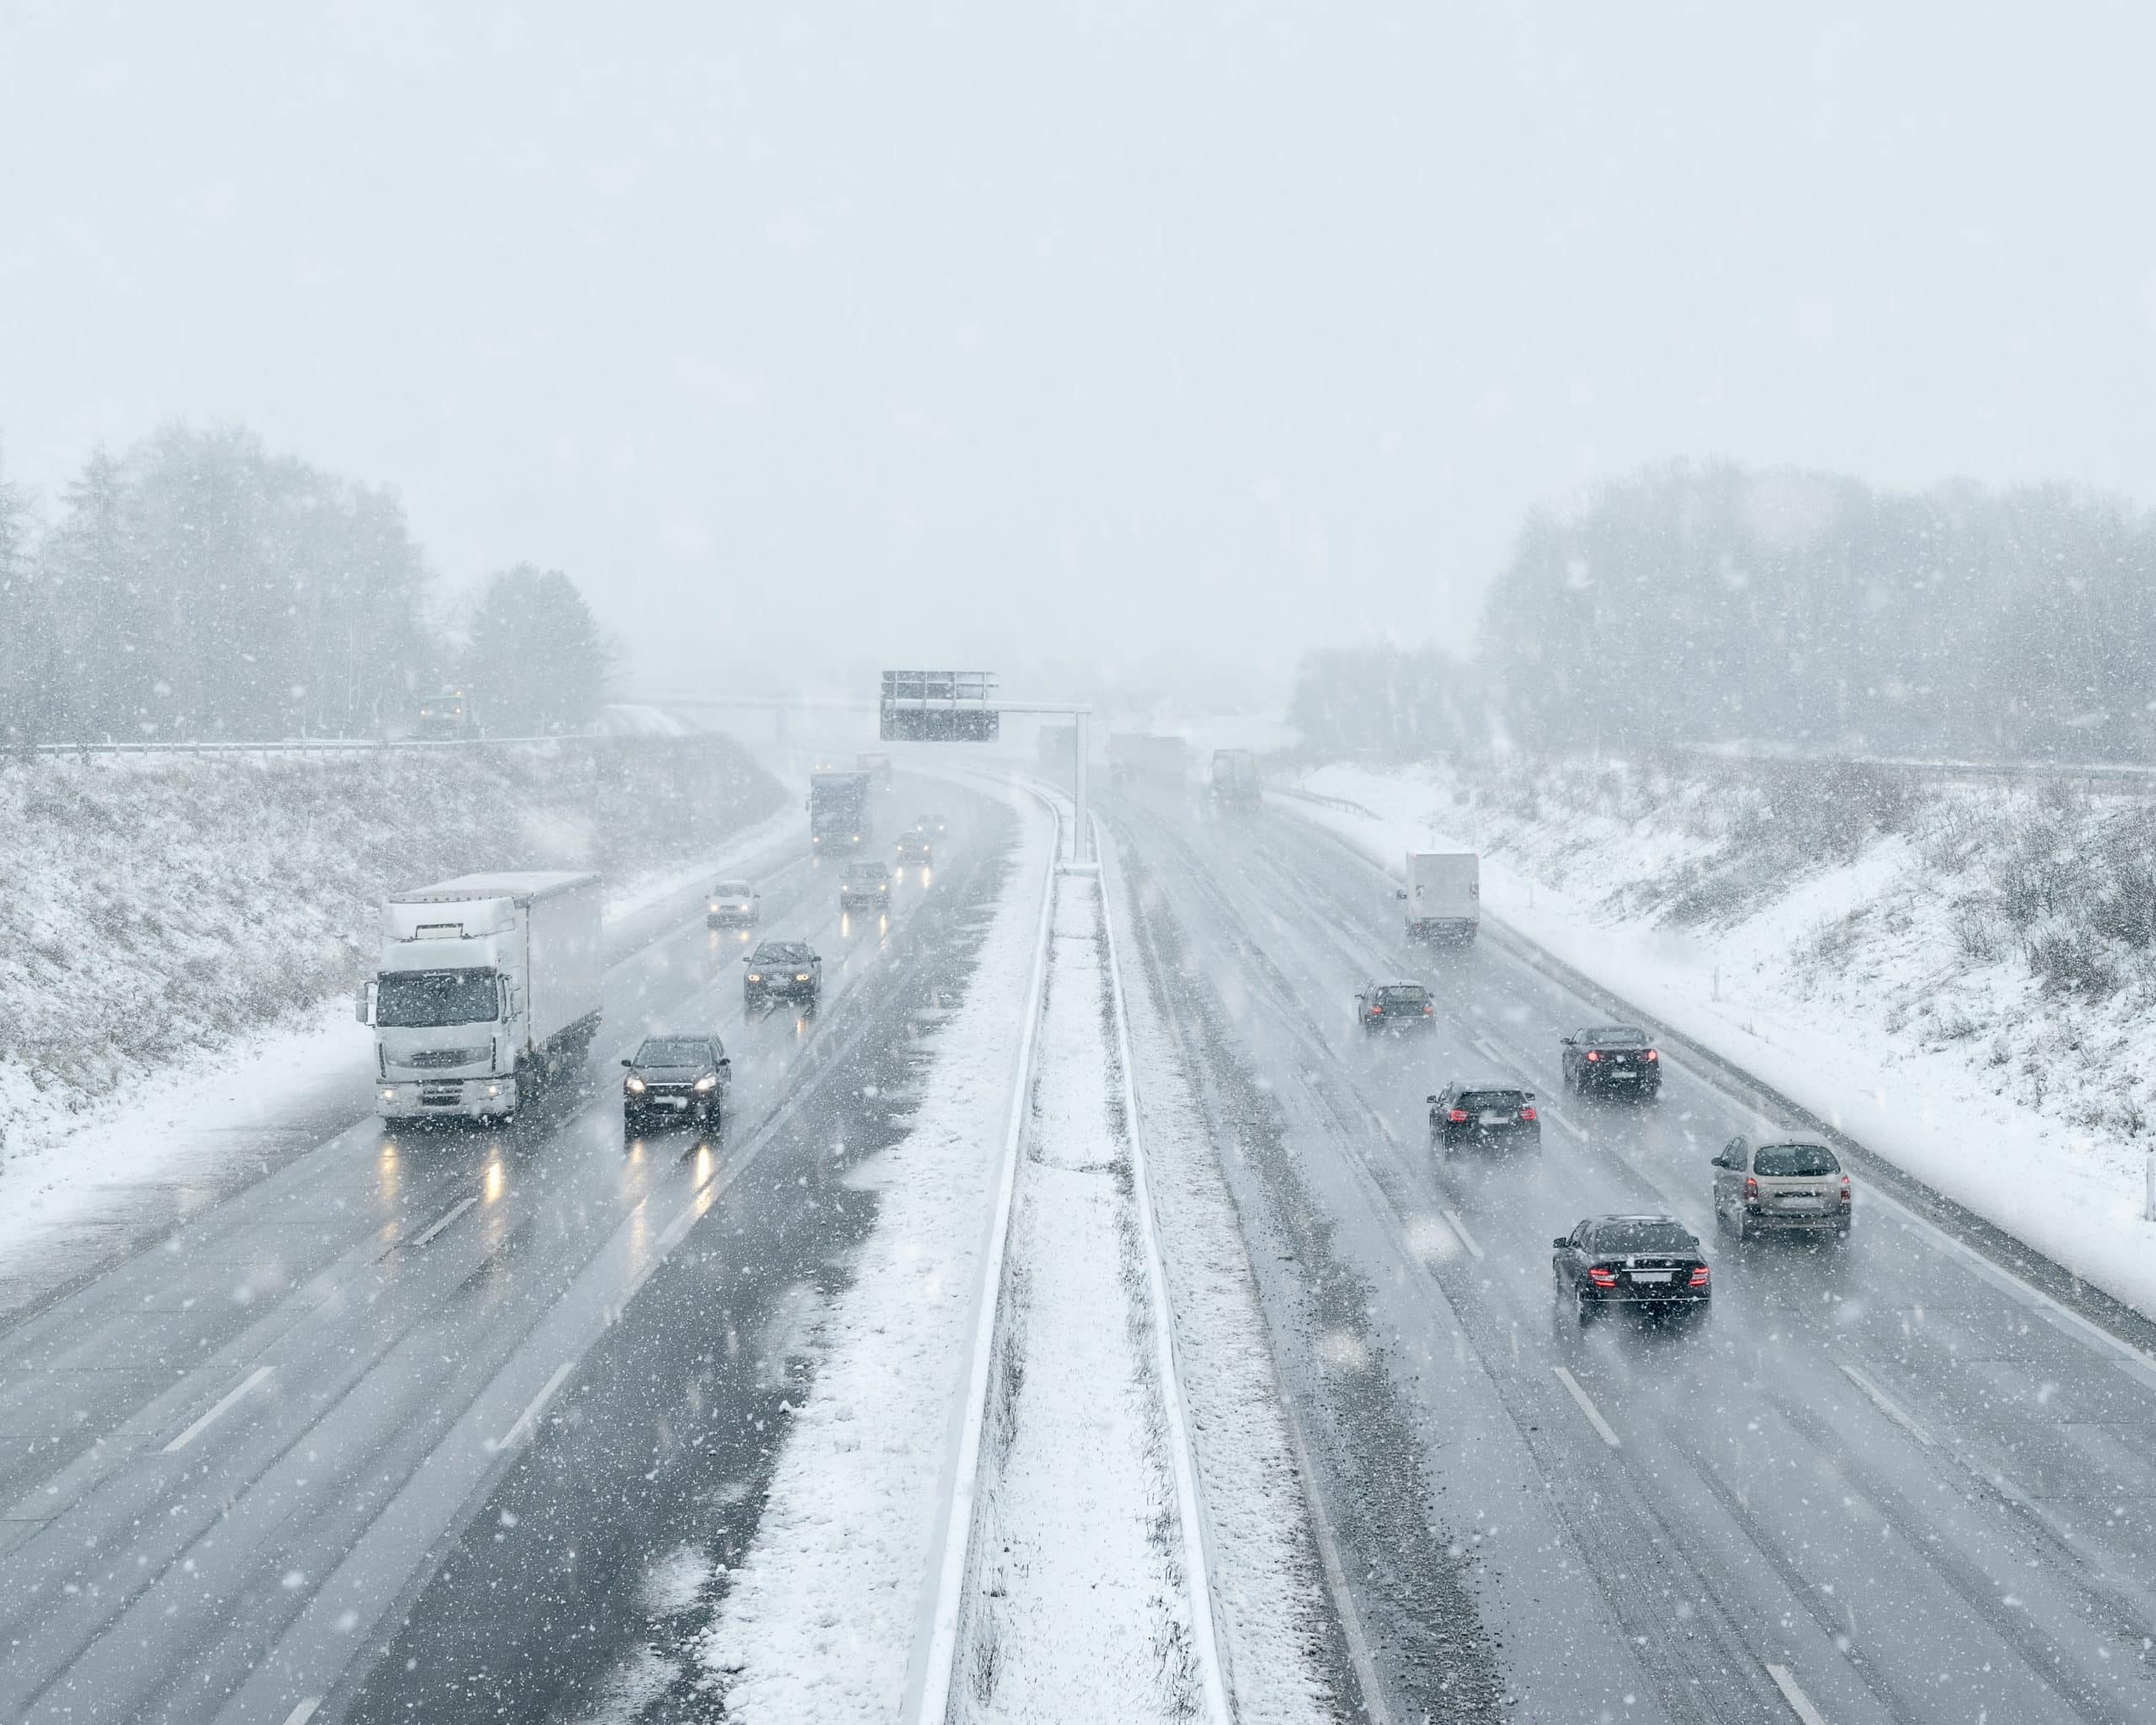 commuter traffic on a snowy highway